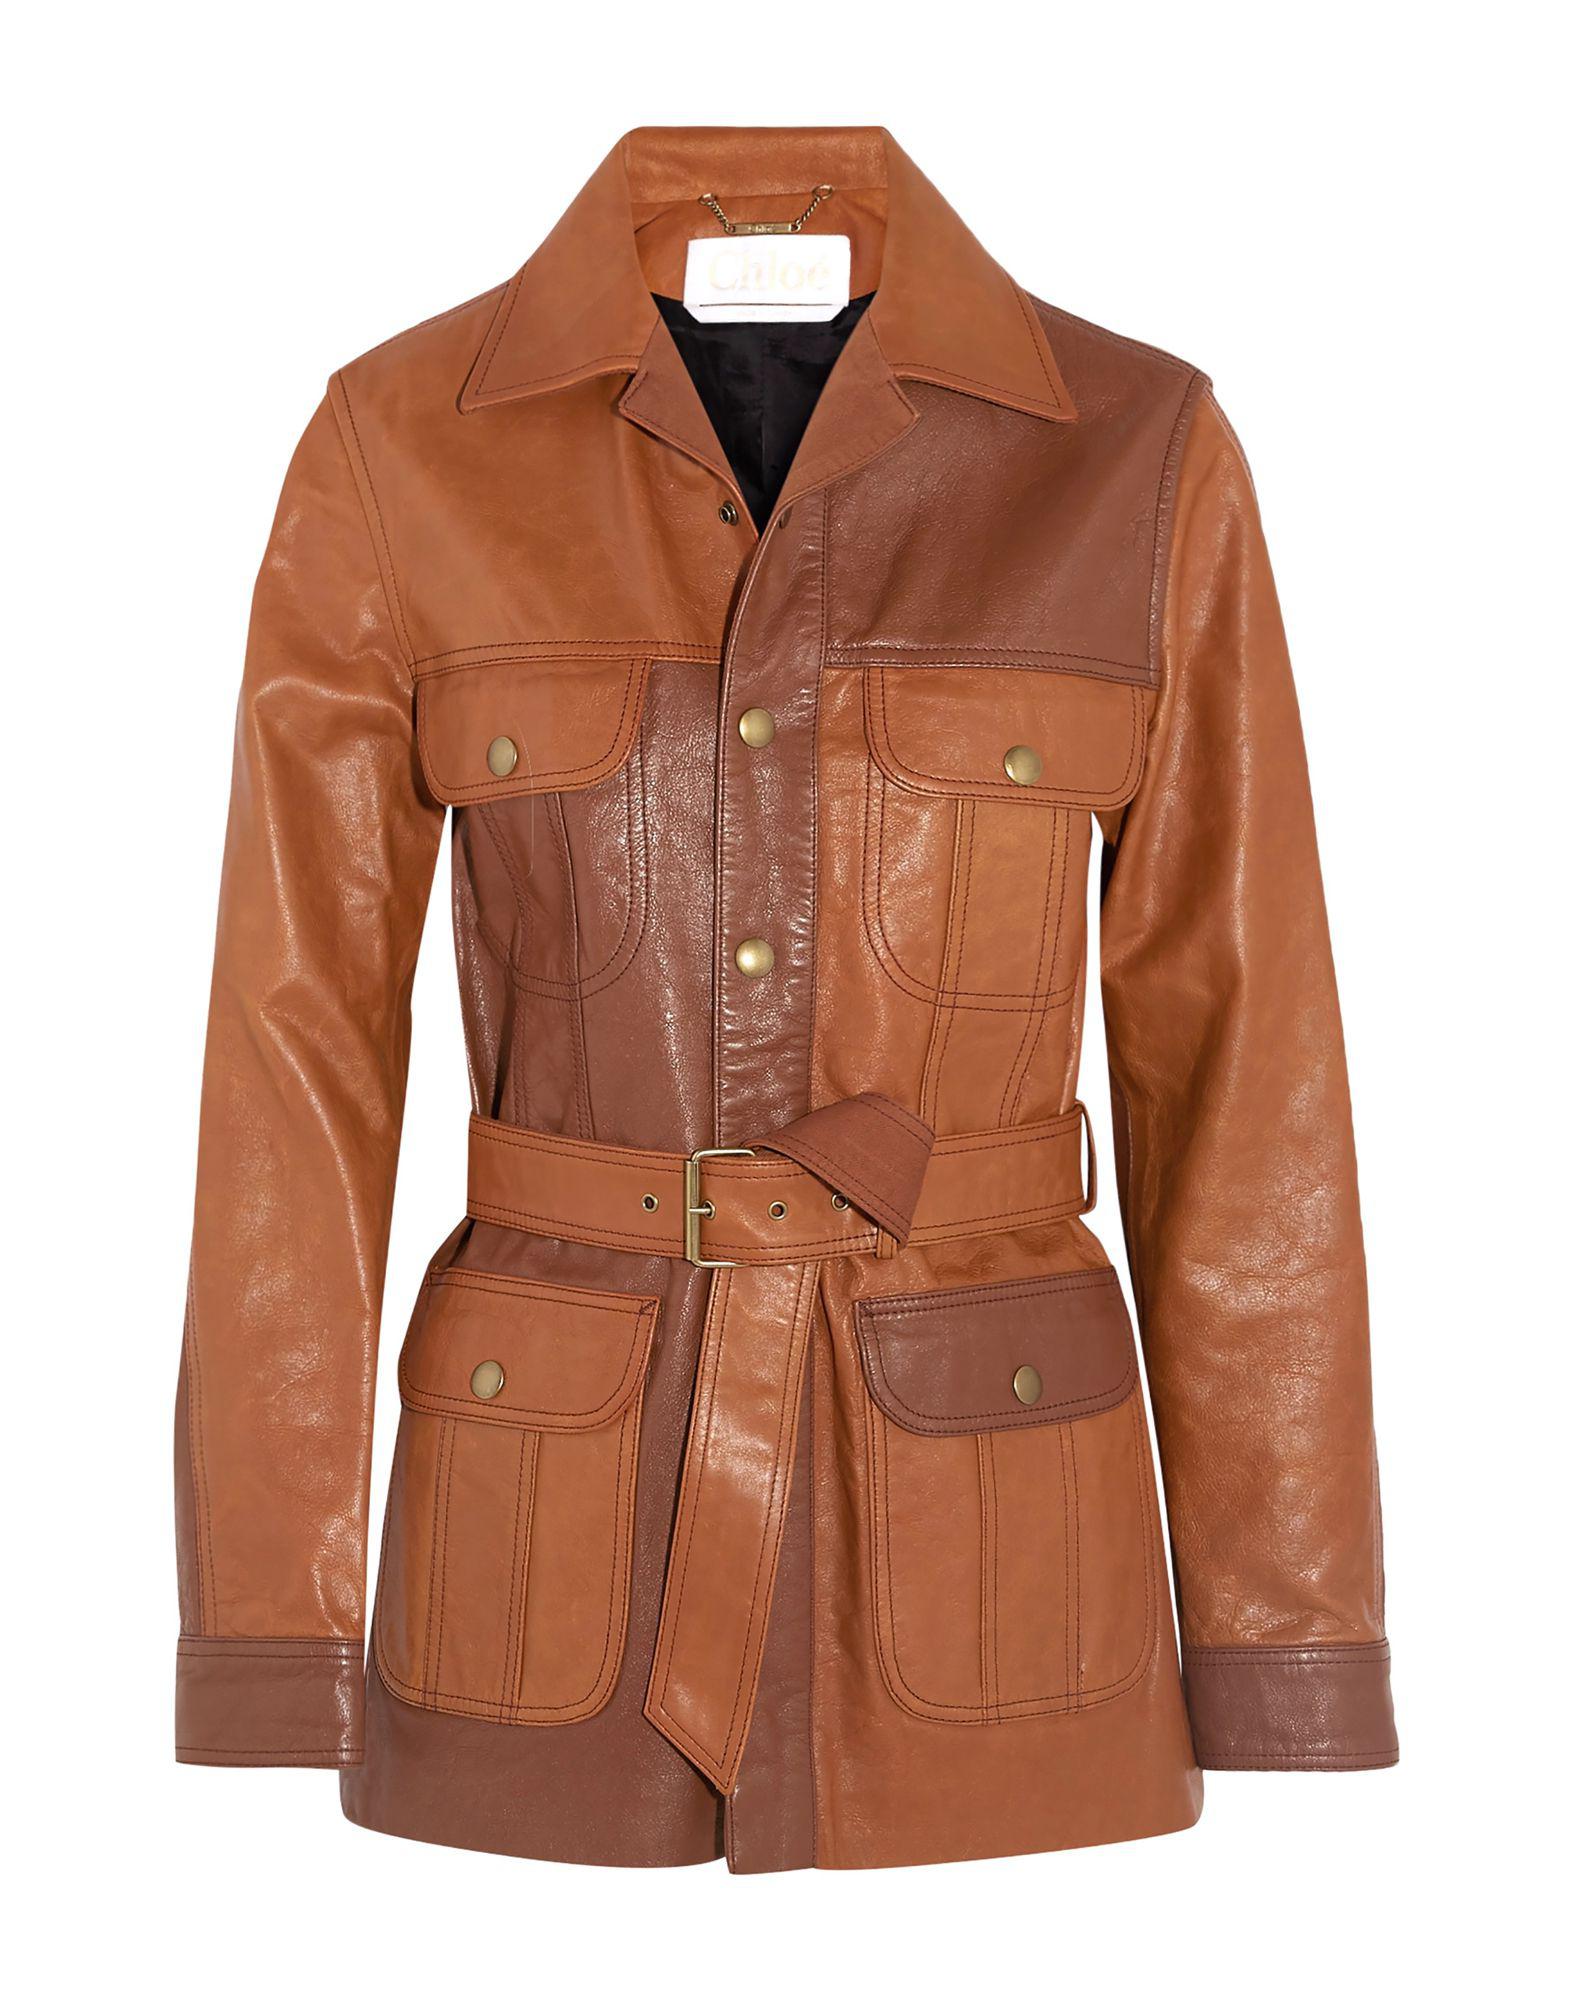 Chloé Leather Jacket in Brown - Lyst